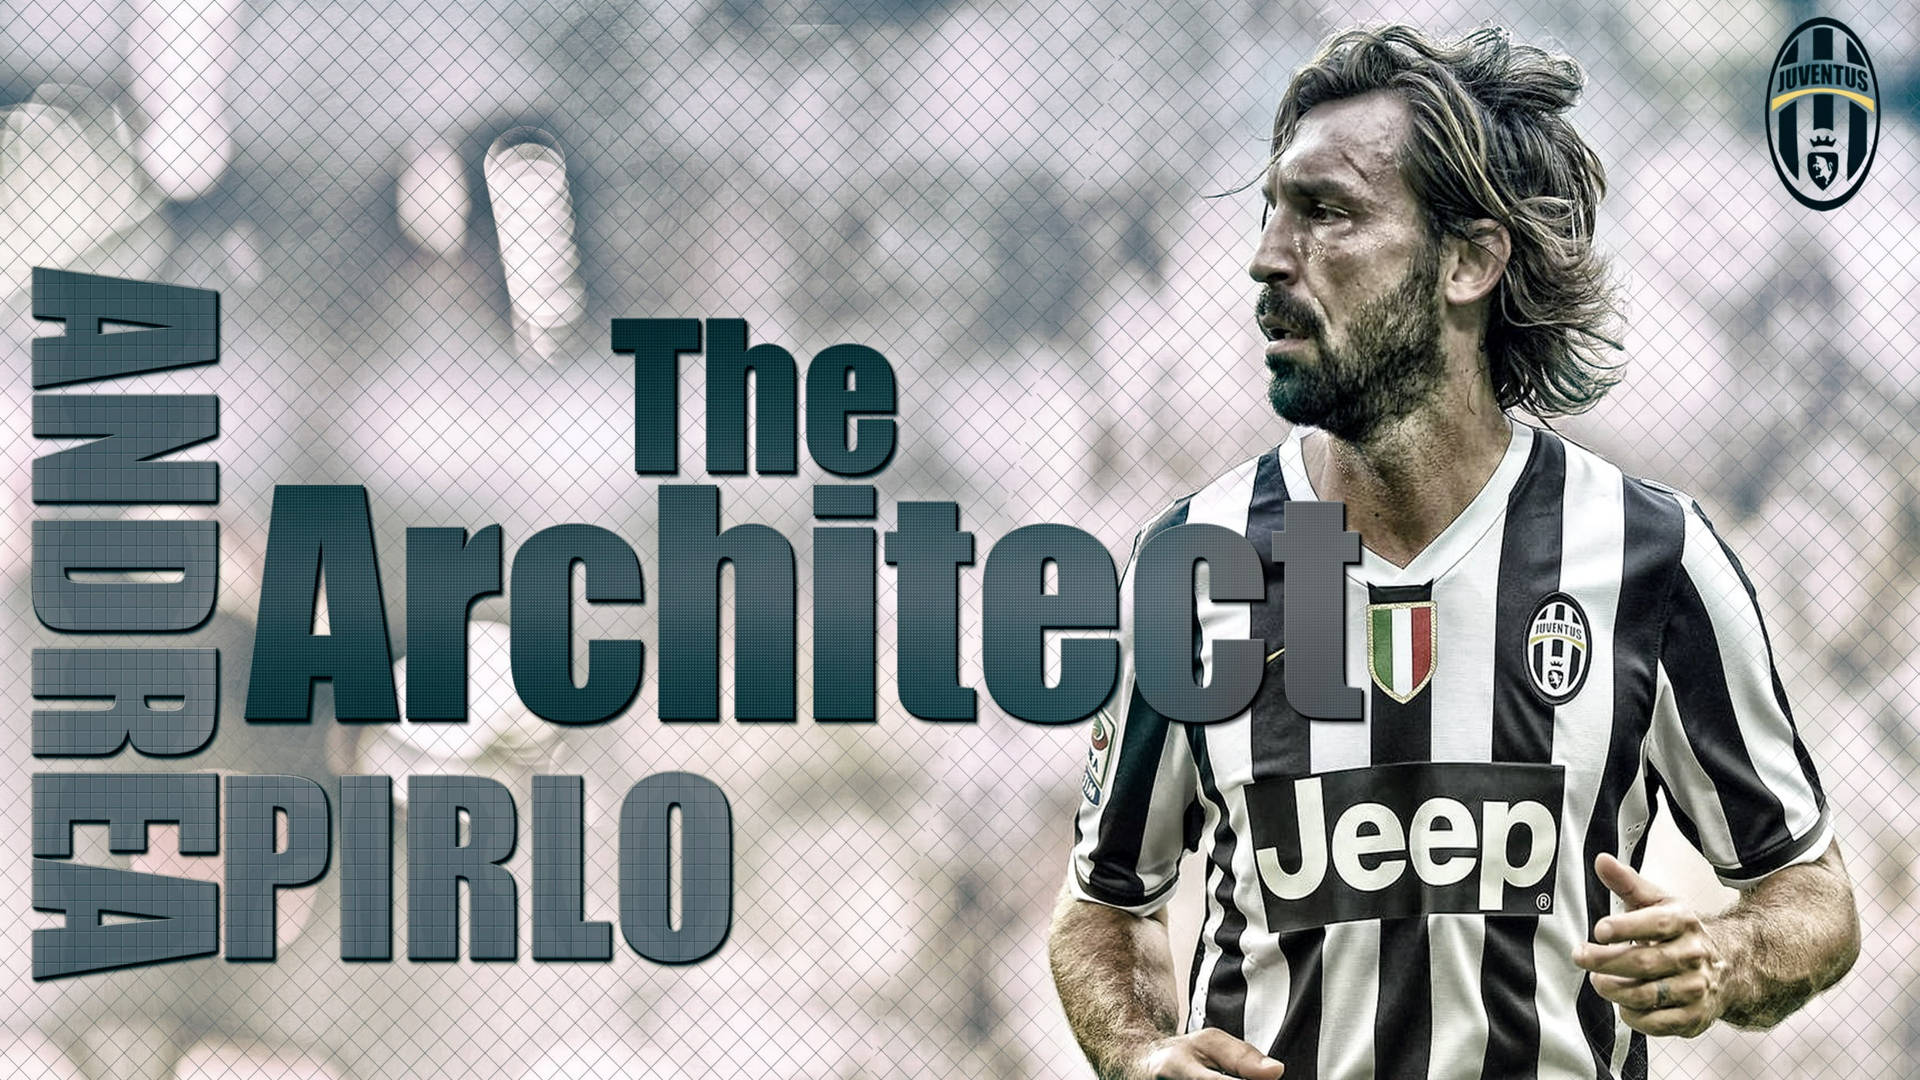 The Legendary Andrea Pirlo In Action On The Football Field Wallpaper